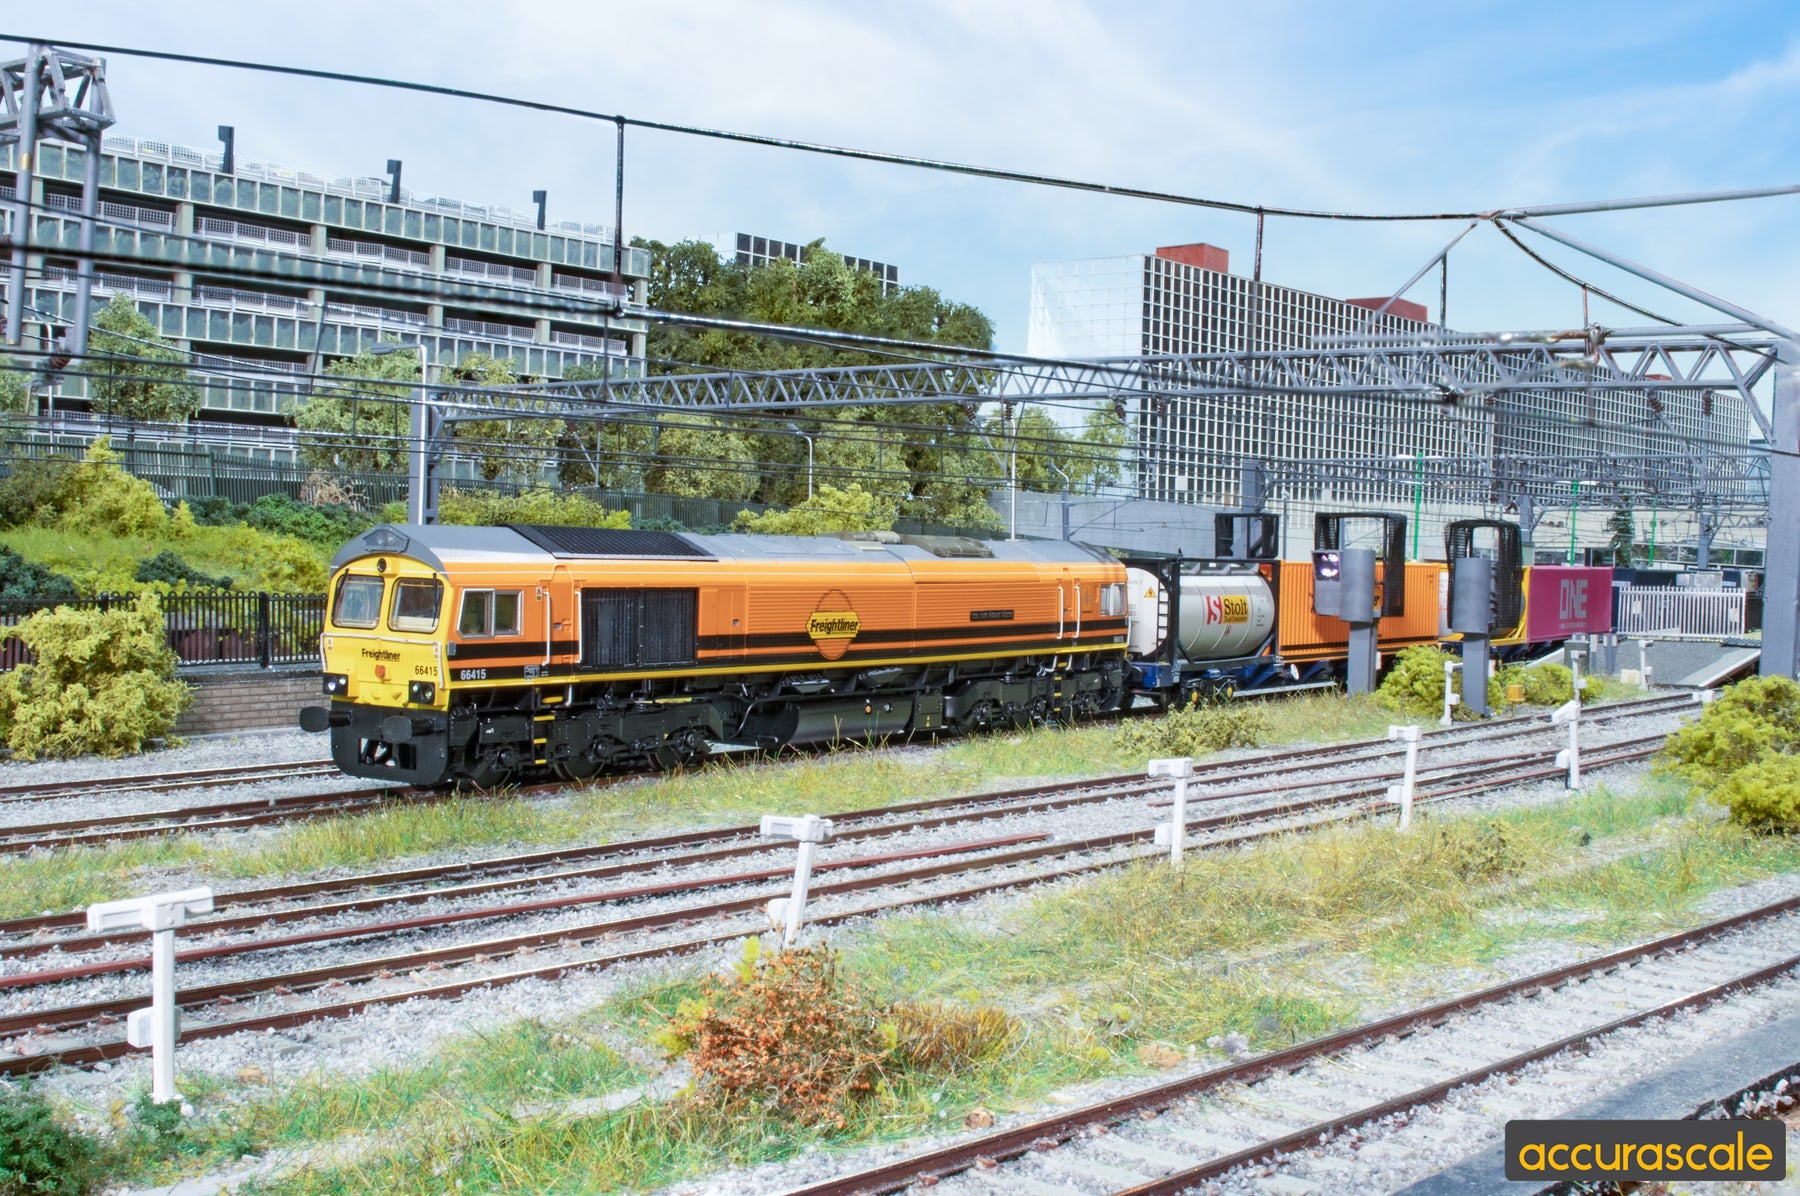 Let's Raise £10,000 Together For Samaritans With Our Latest Class 66!